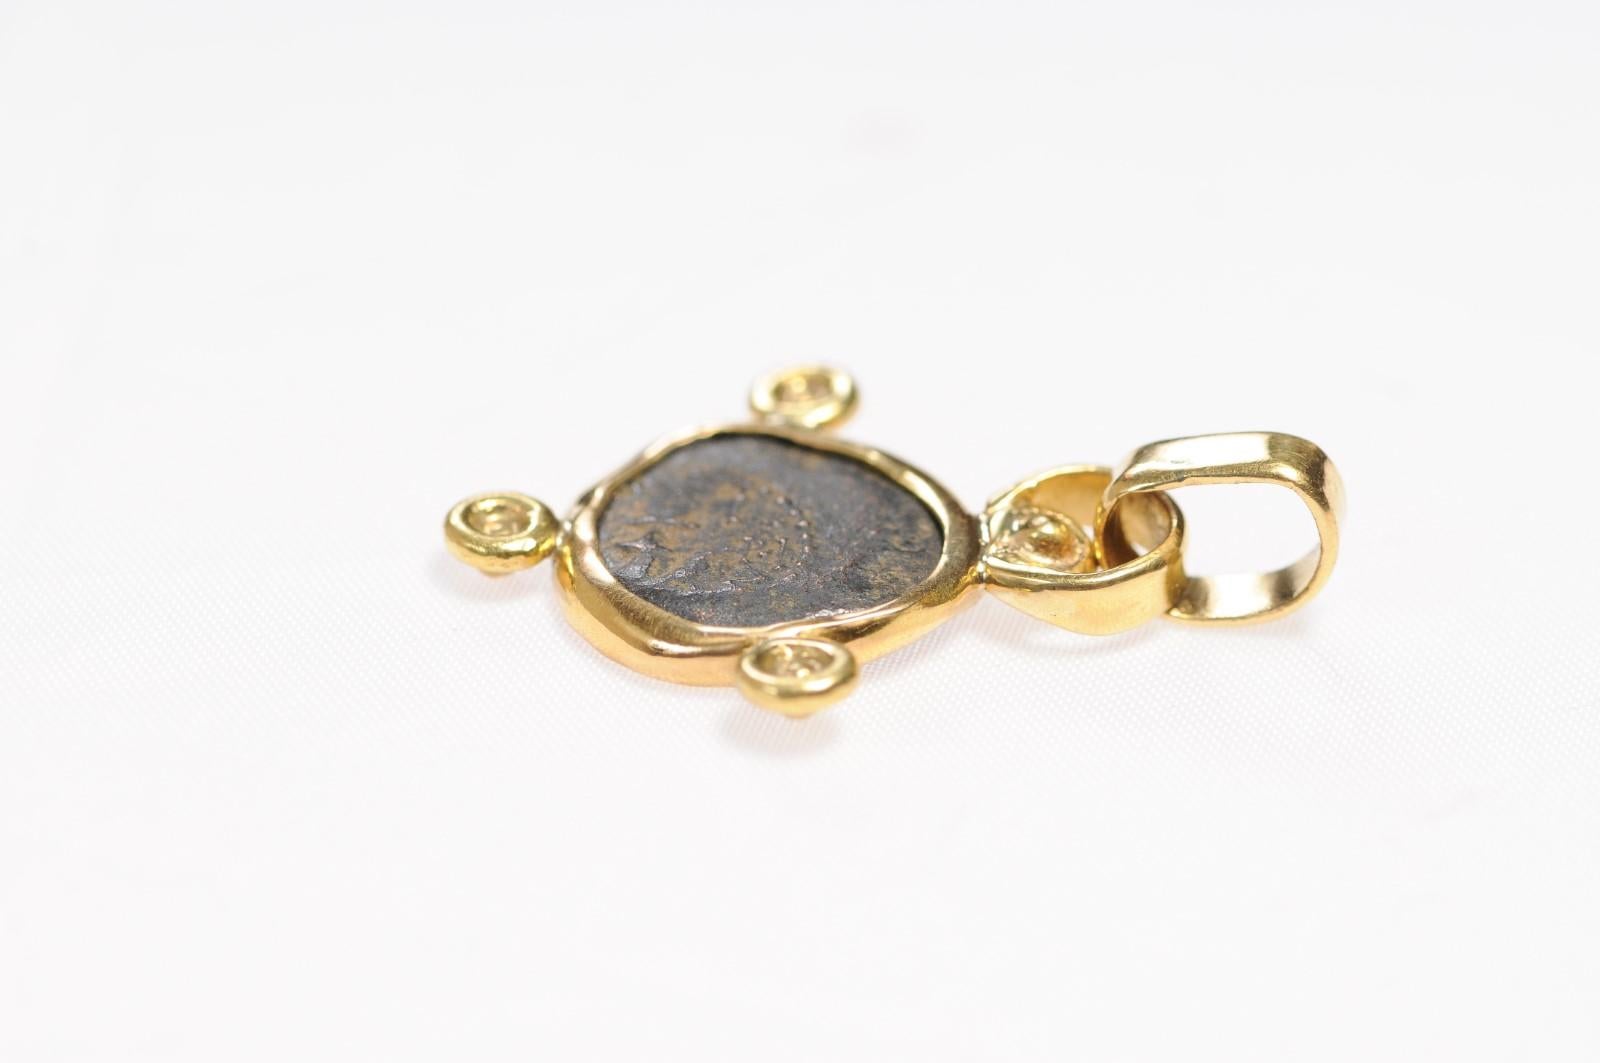 Roman Widow's Mite Coin, 22kt Gold Pendant (pendant only) For Sale 1